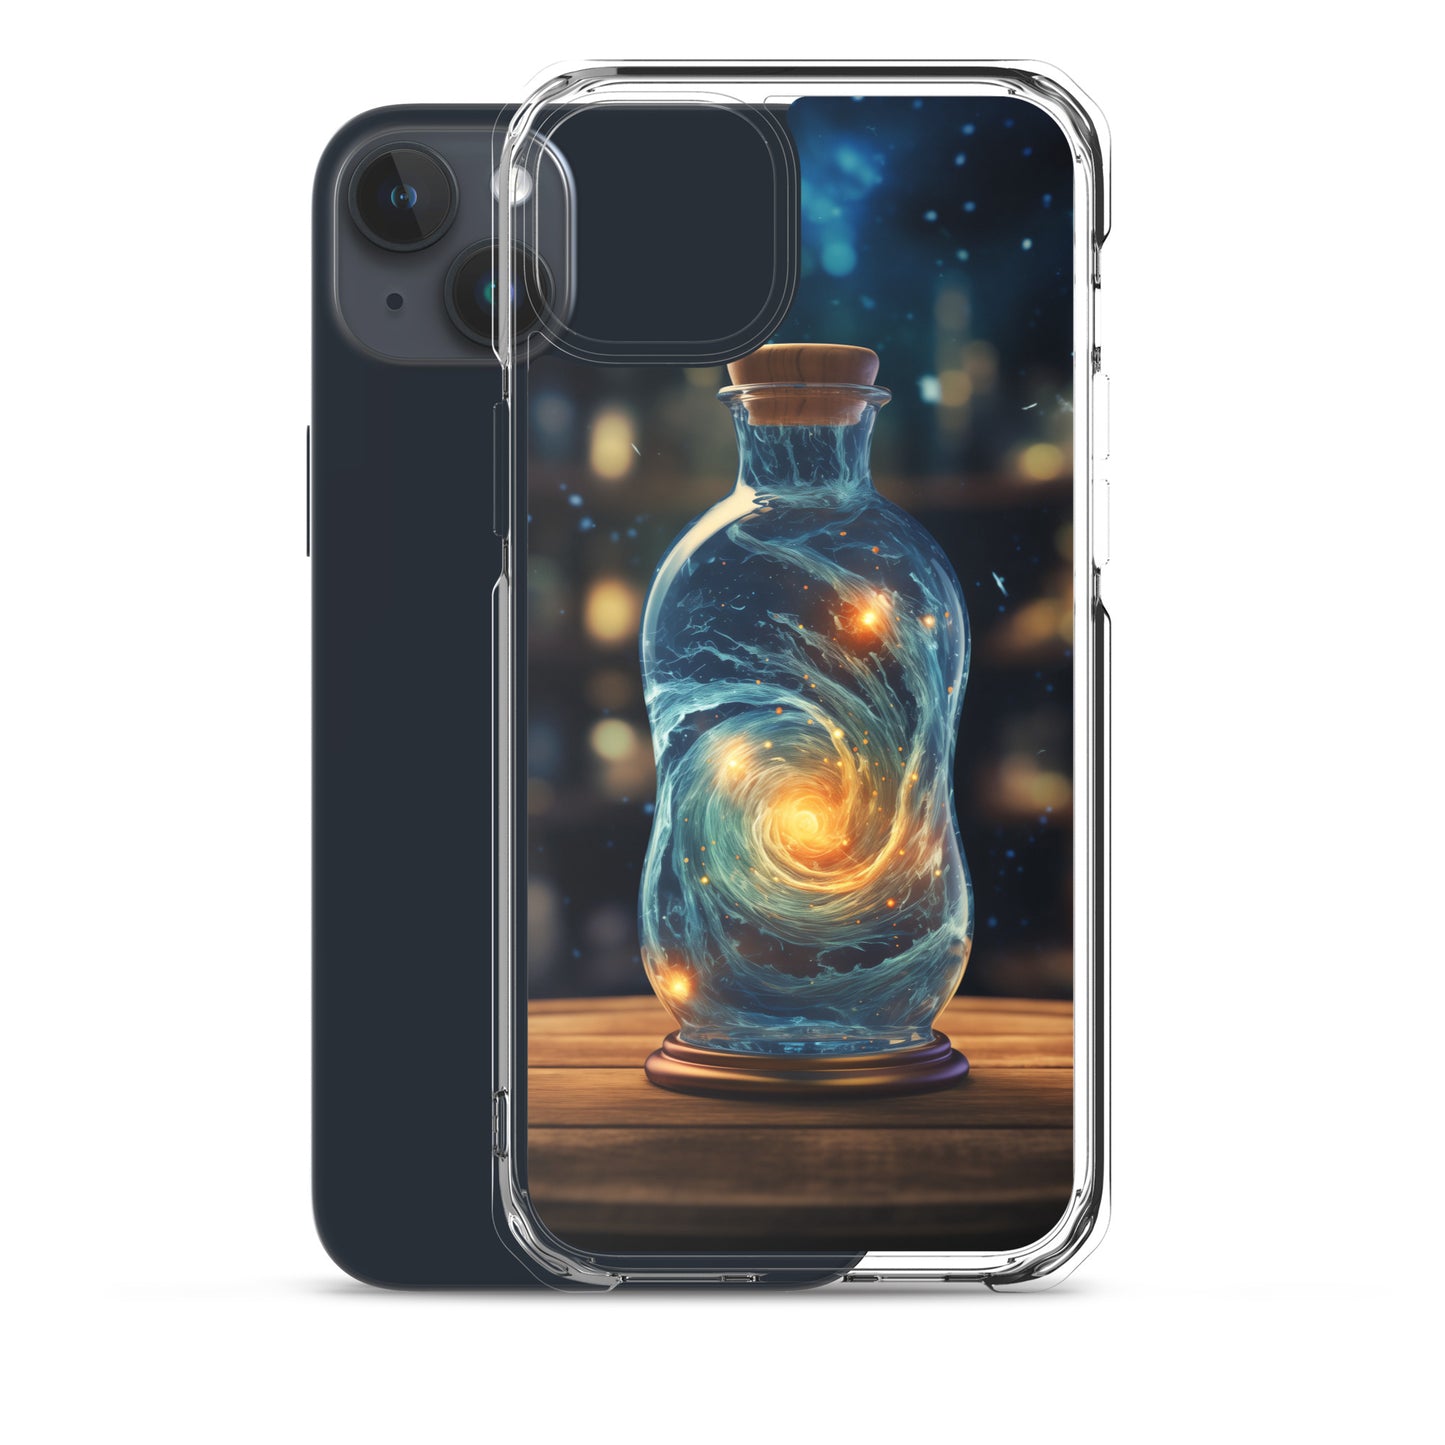 iPhone Case - Universe in a Bottle #1